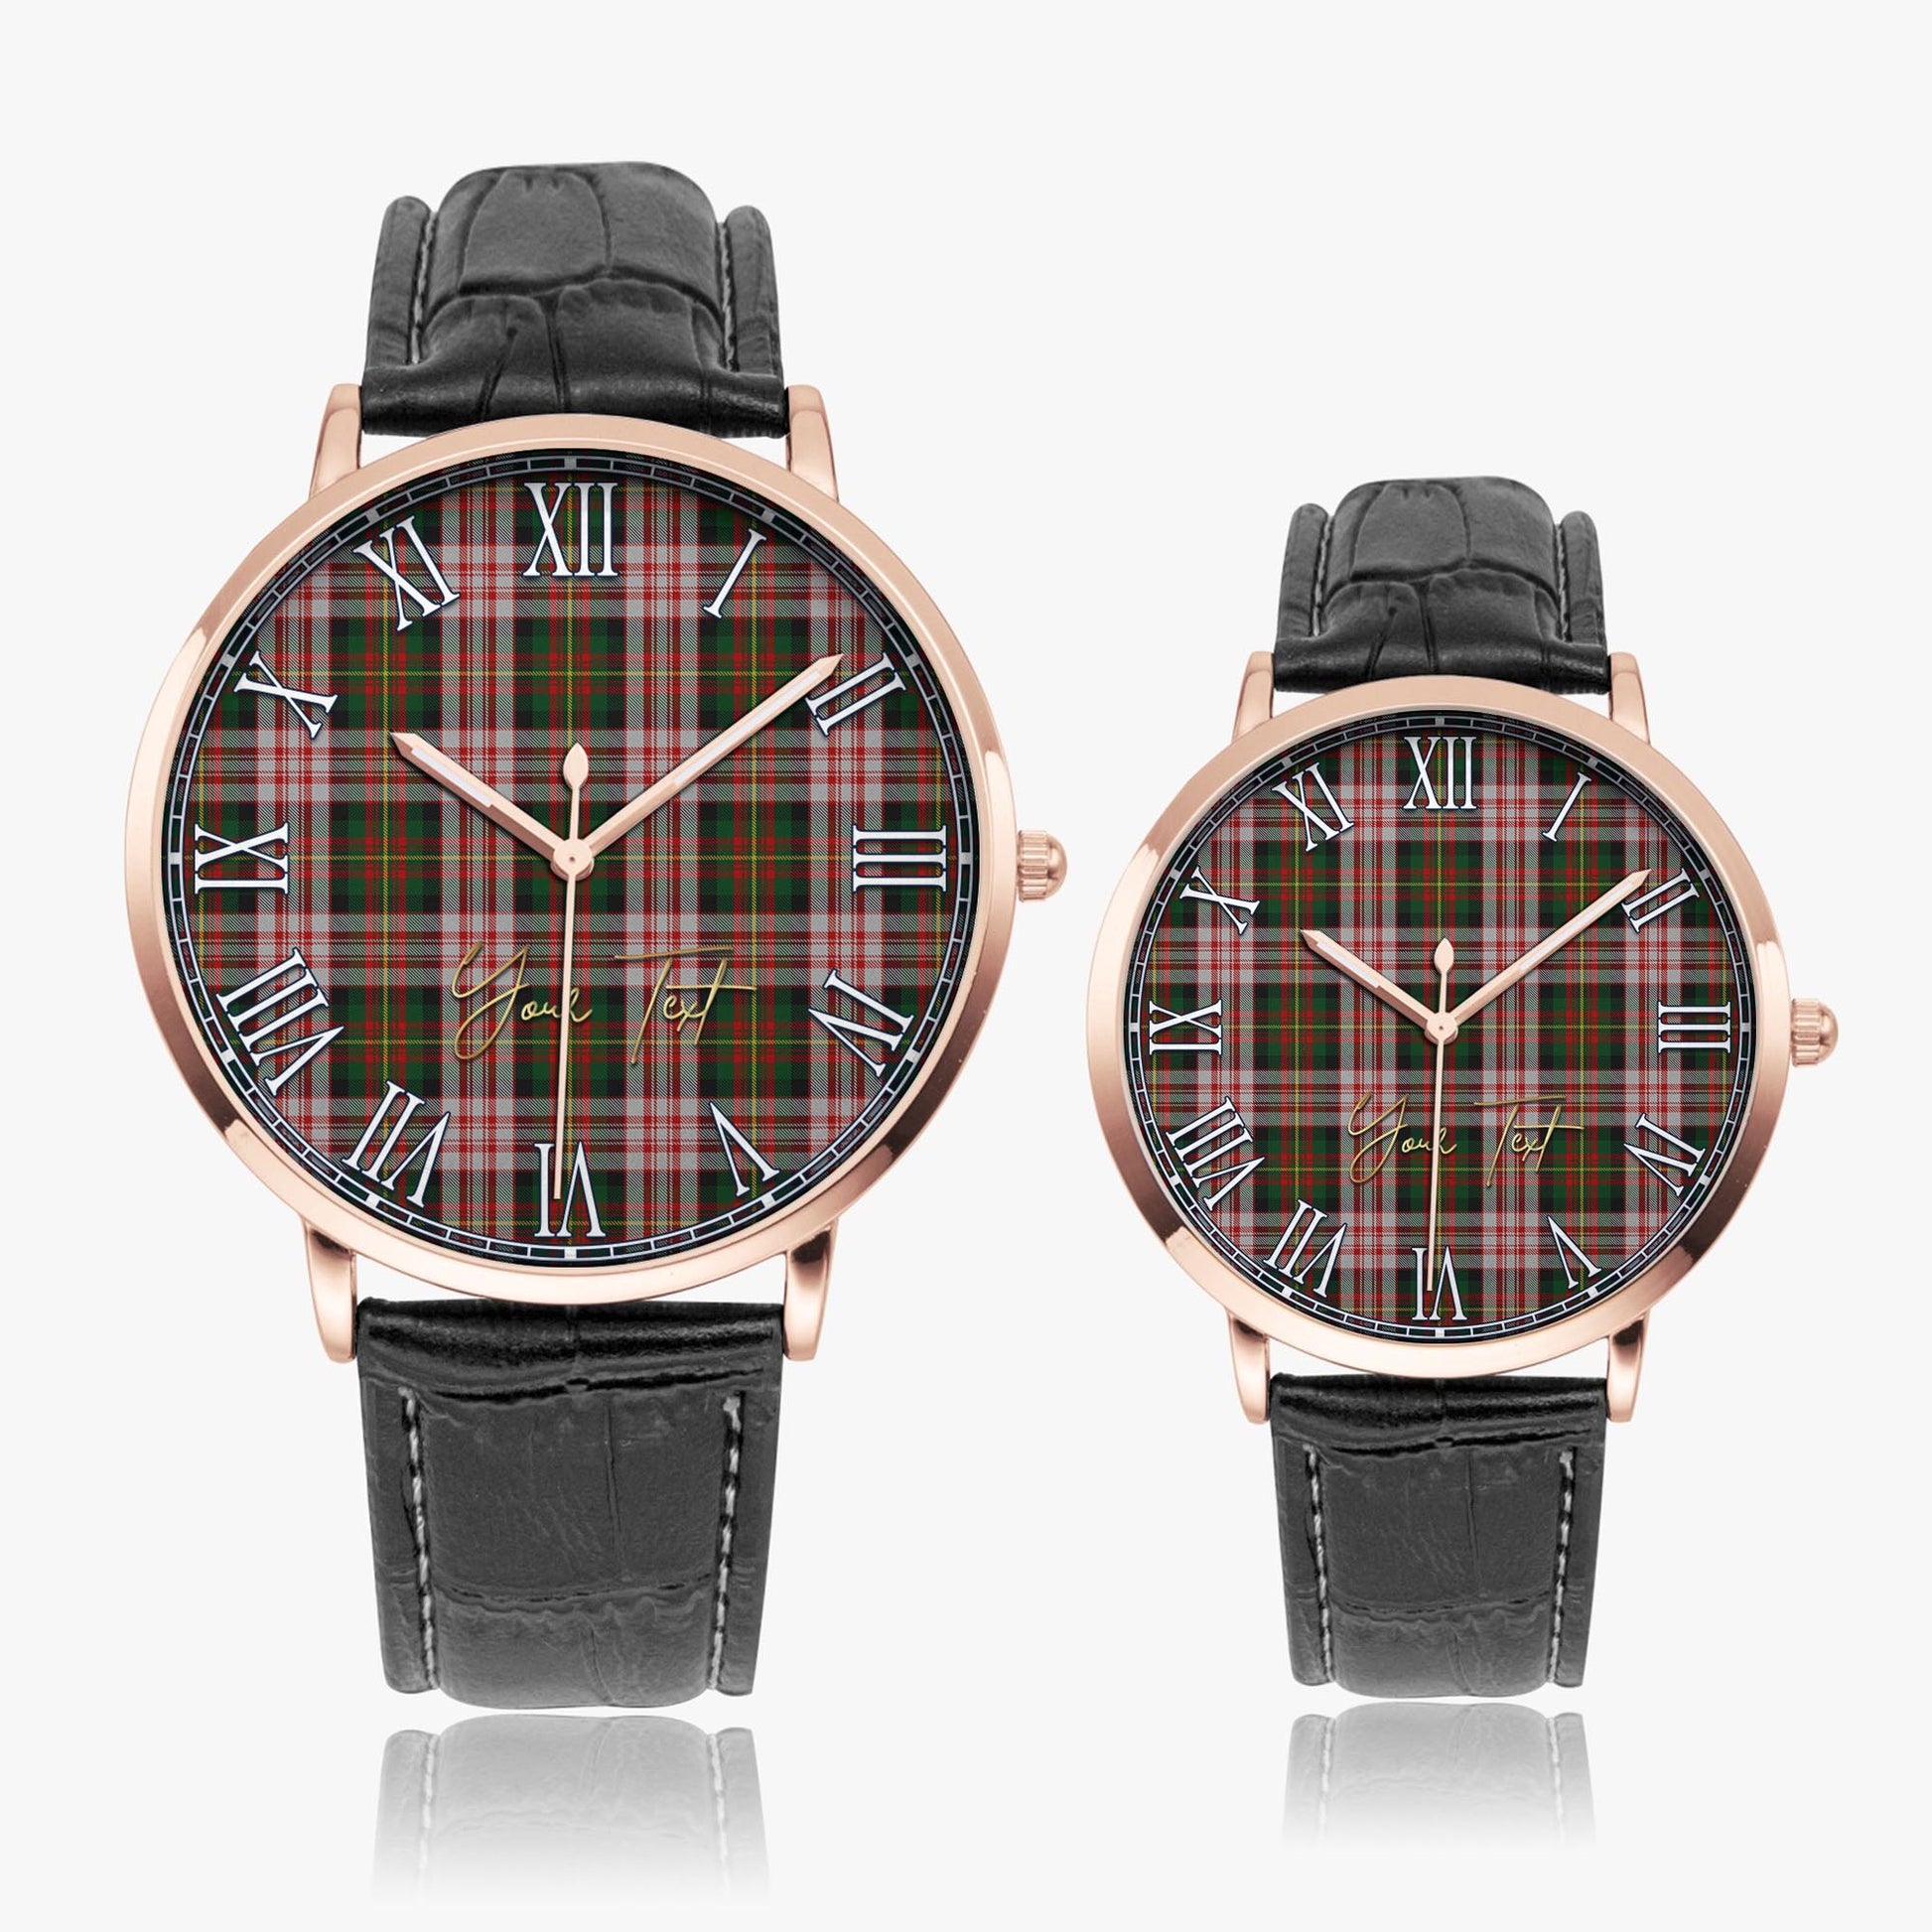 Carnegie Dress Tartan Personalized Your Text Leather Trap Quartz Watch Ultra Thin Rose Gold Case With Black Leather Strap - Tartanvibesclothing